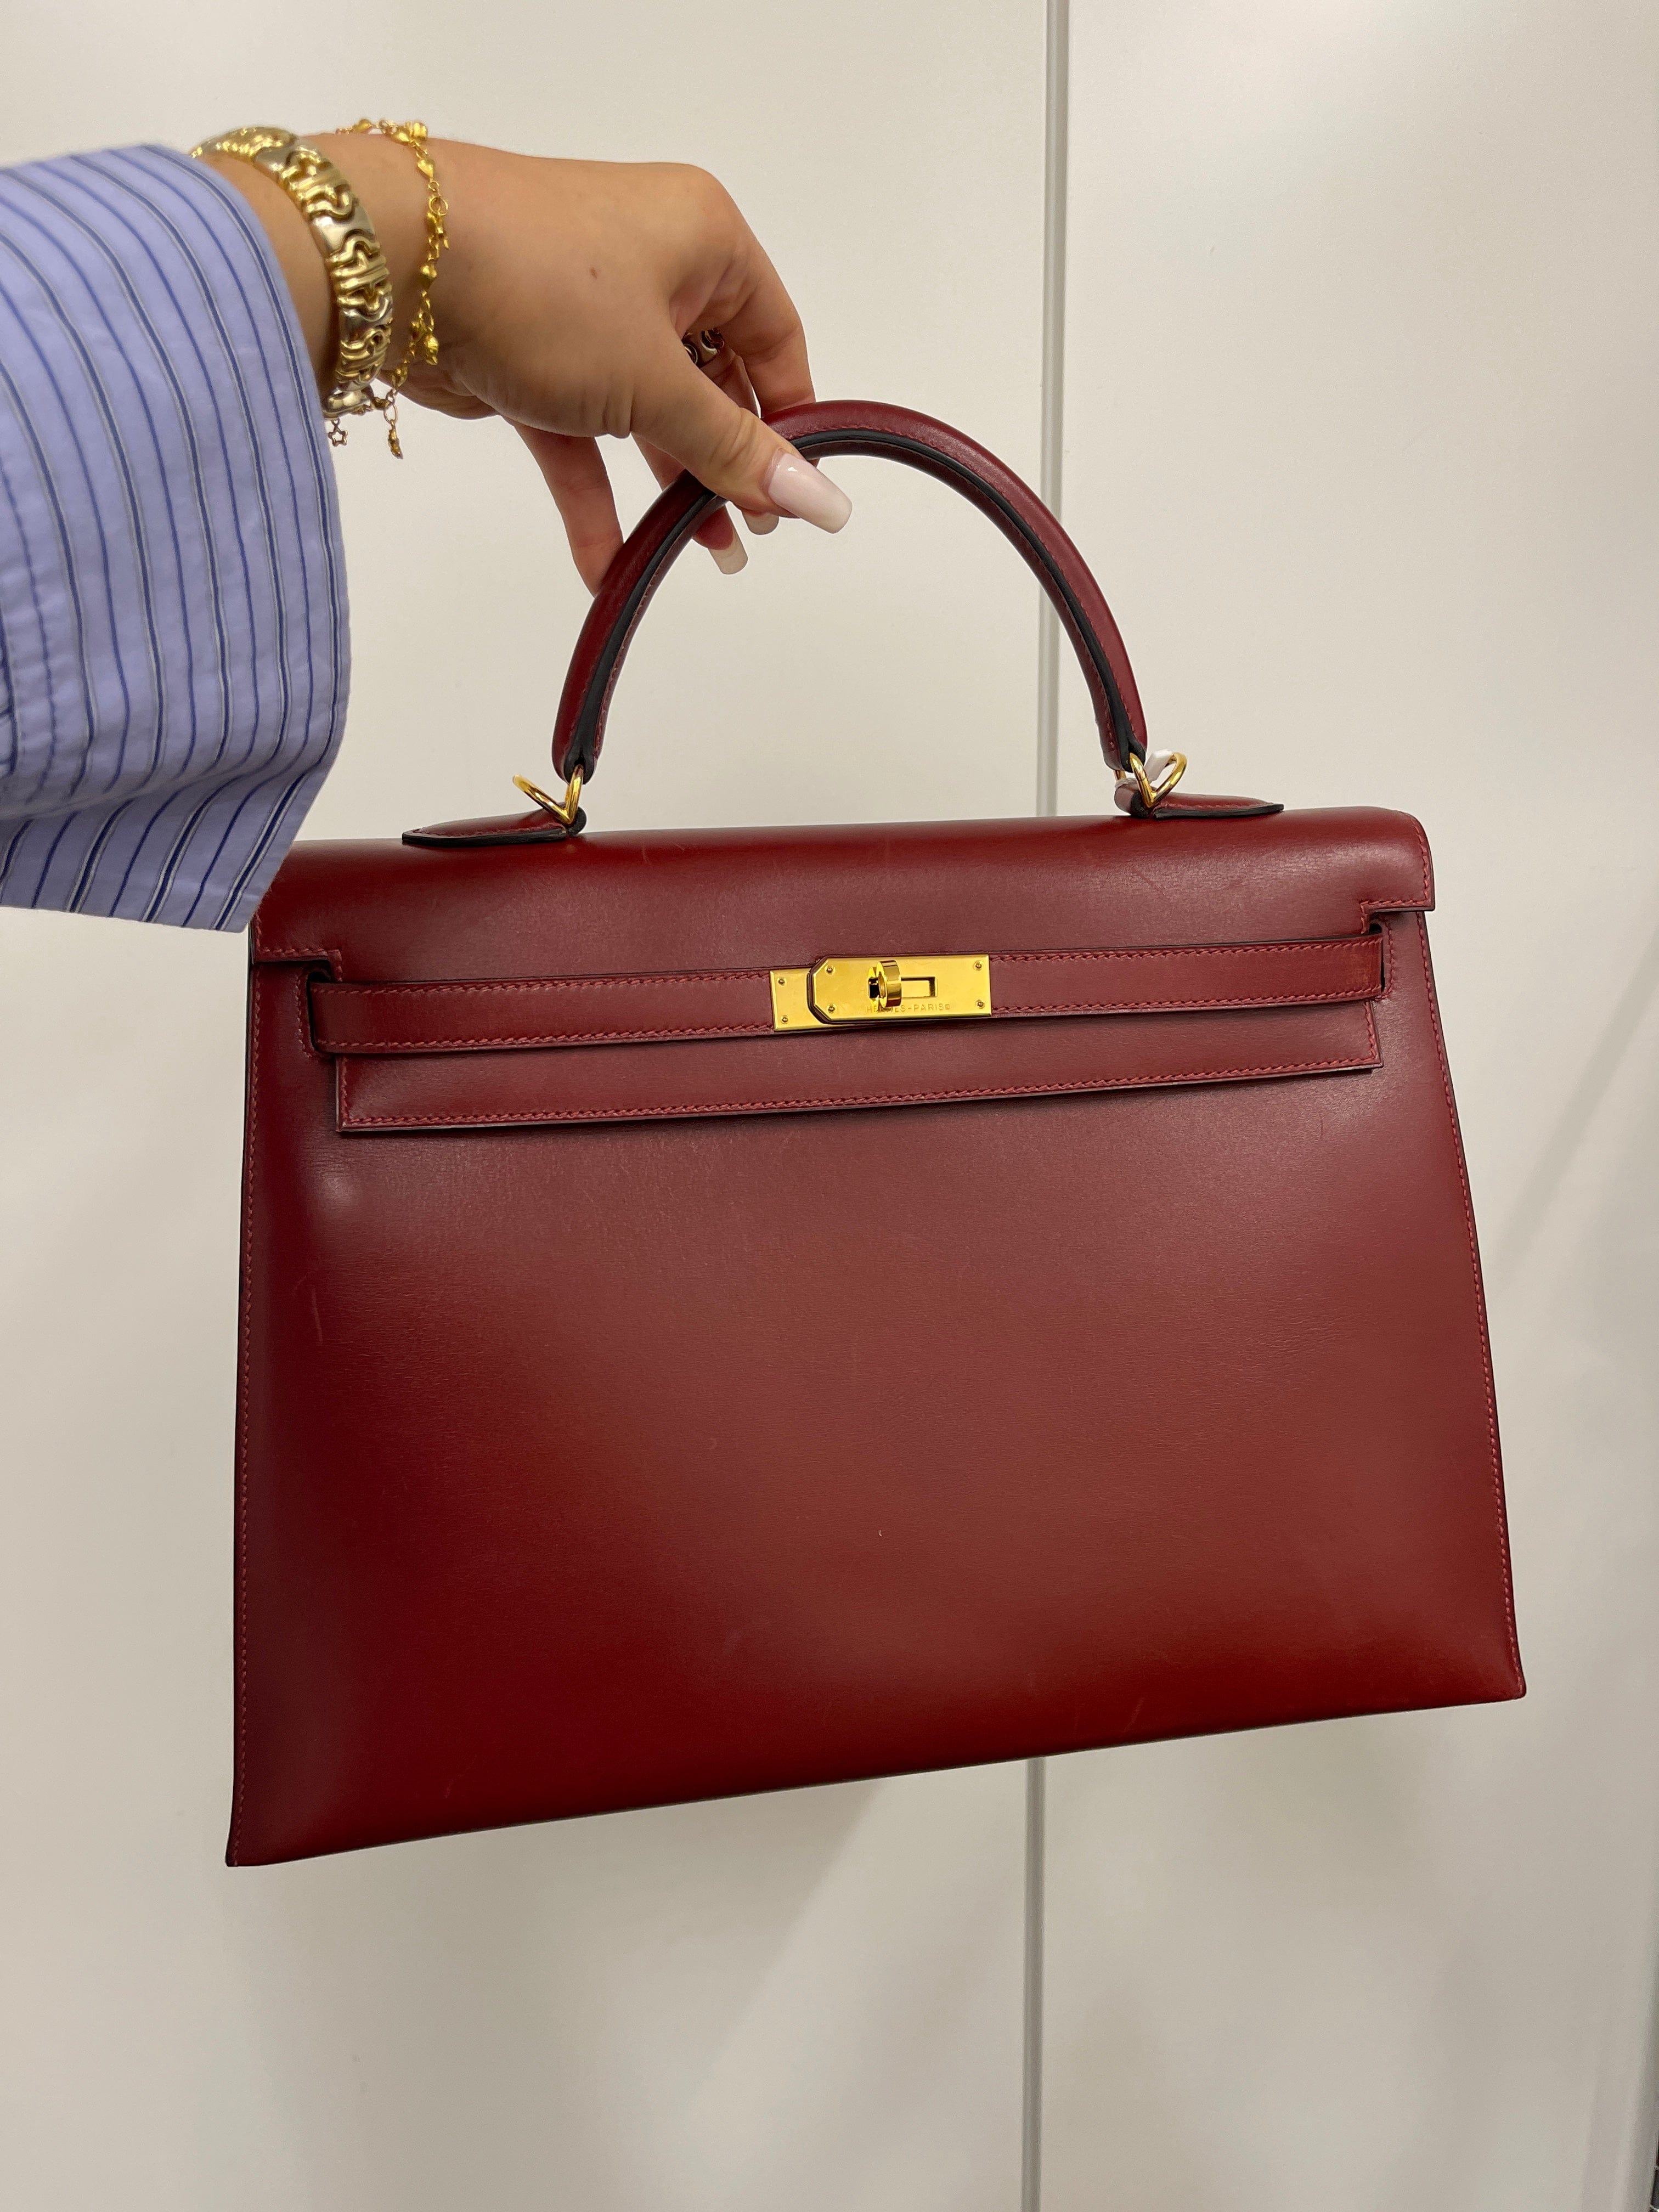 Hermes Hermes Kelly 35 Rouge H with GHW - AJC0629